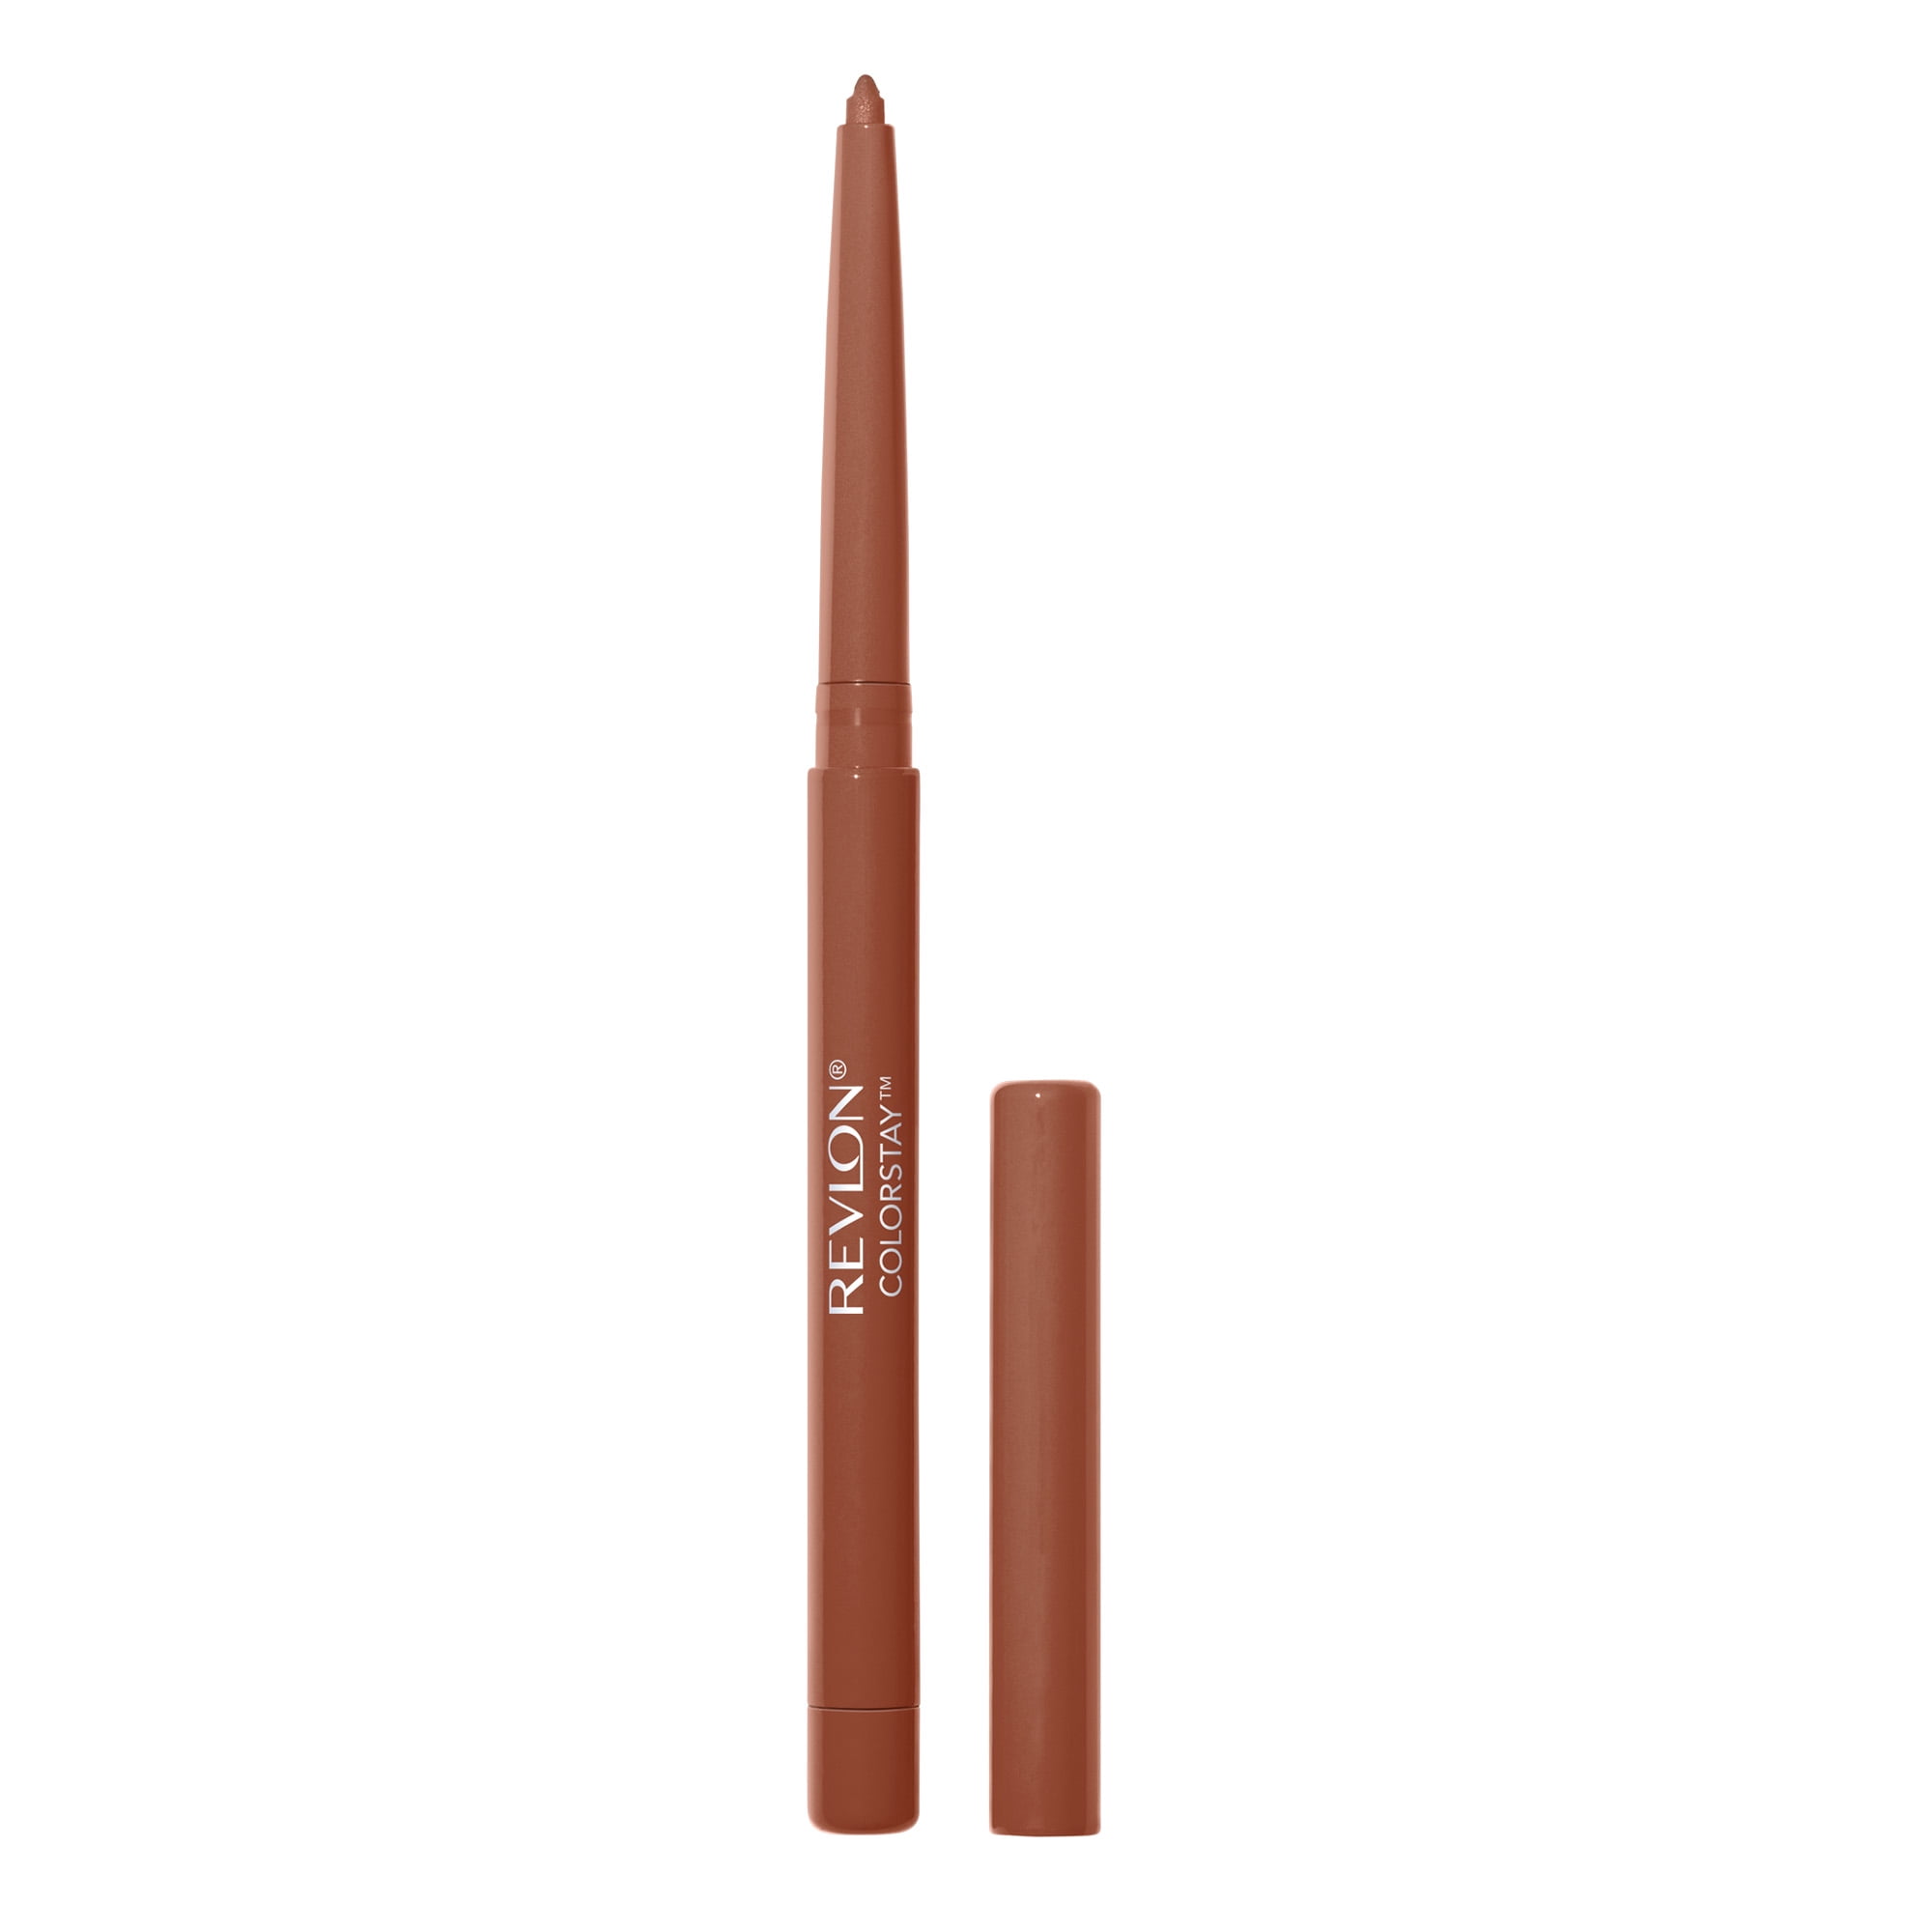 Revlon ColorStay Lip Liner Pencil with Built-in Sharpener, Longwearing & Defined Rich Lip Colors, 635 Sienna, 0.01 oz